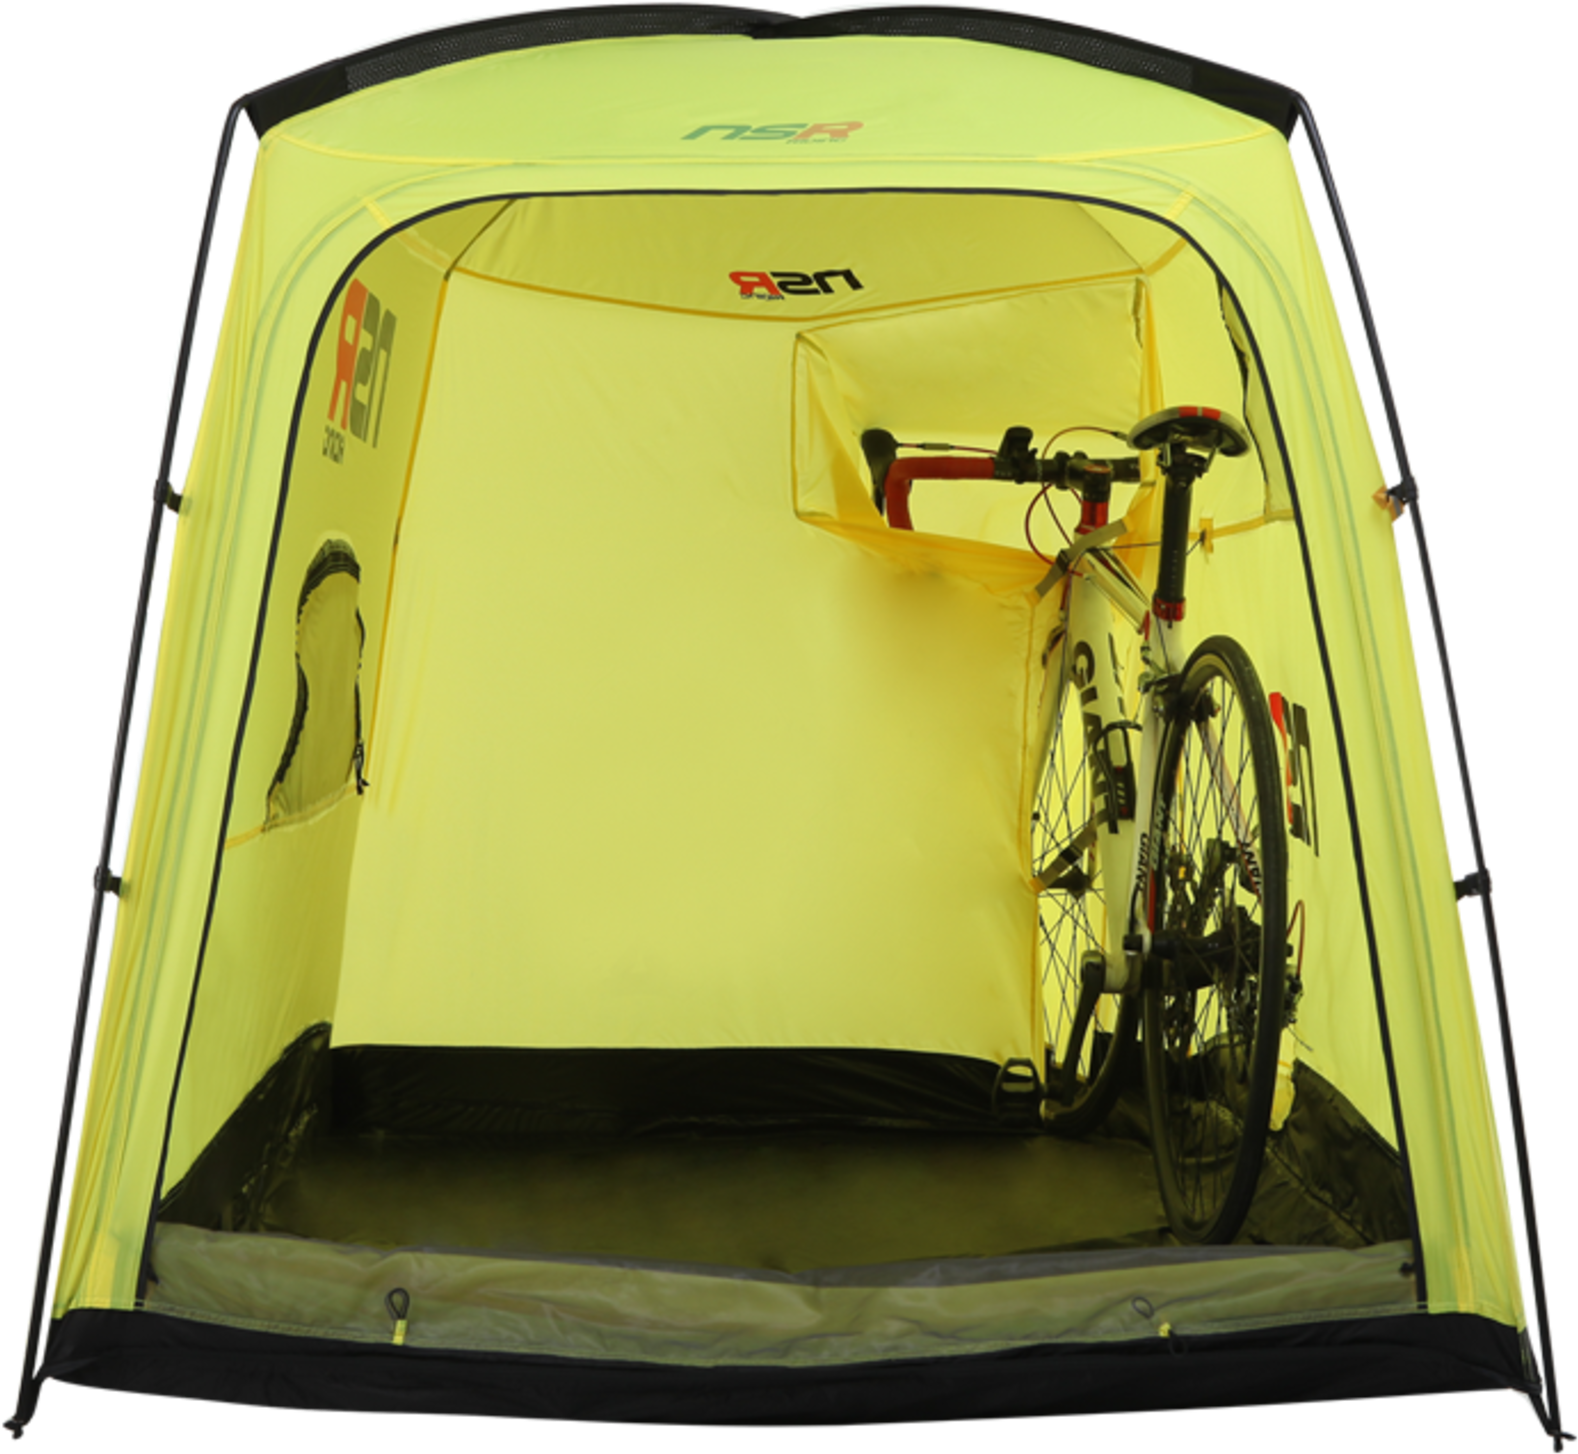 A Yellow Tent With A Bicycle Inside